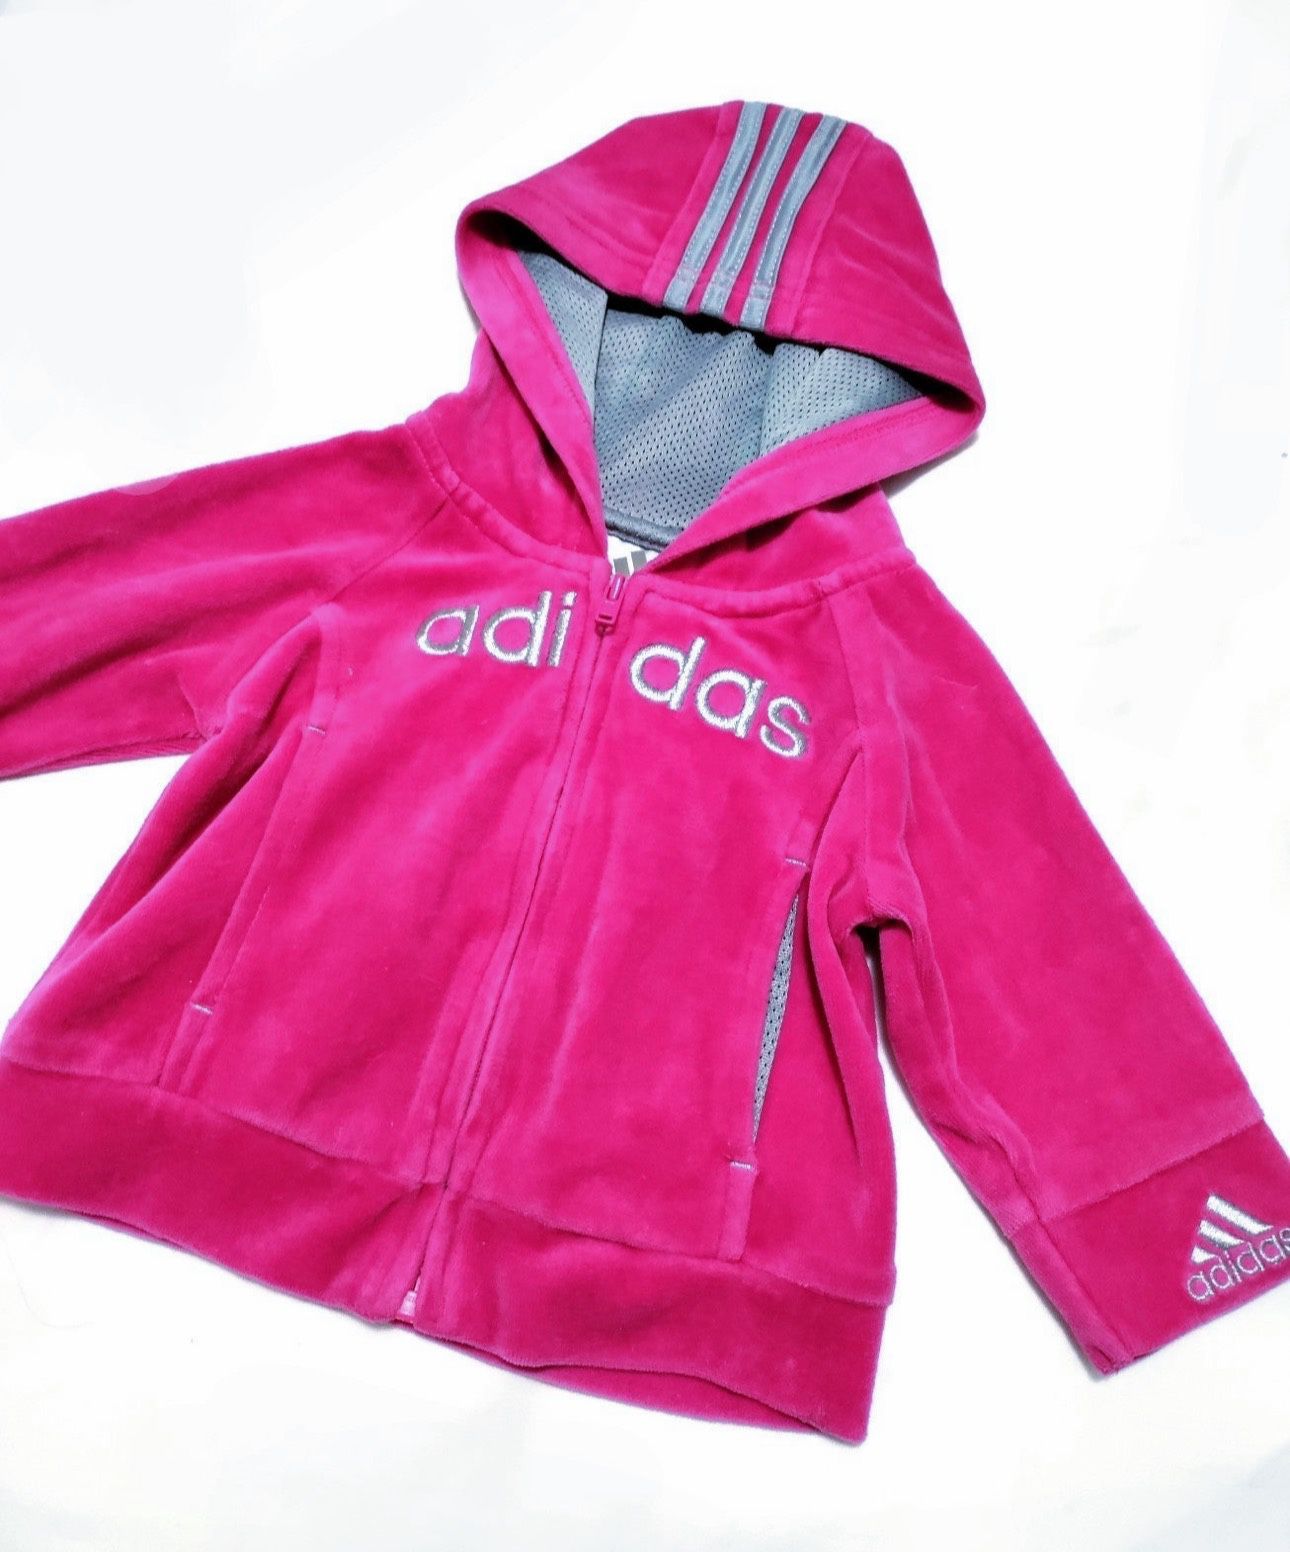 ✨ ADIDAS BABY VELOUR TRACKSUIT JACKET INFANT 3 MO BRIGHT HOT PINK BARBIE PINK✨